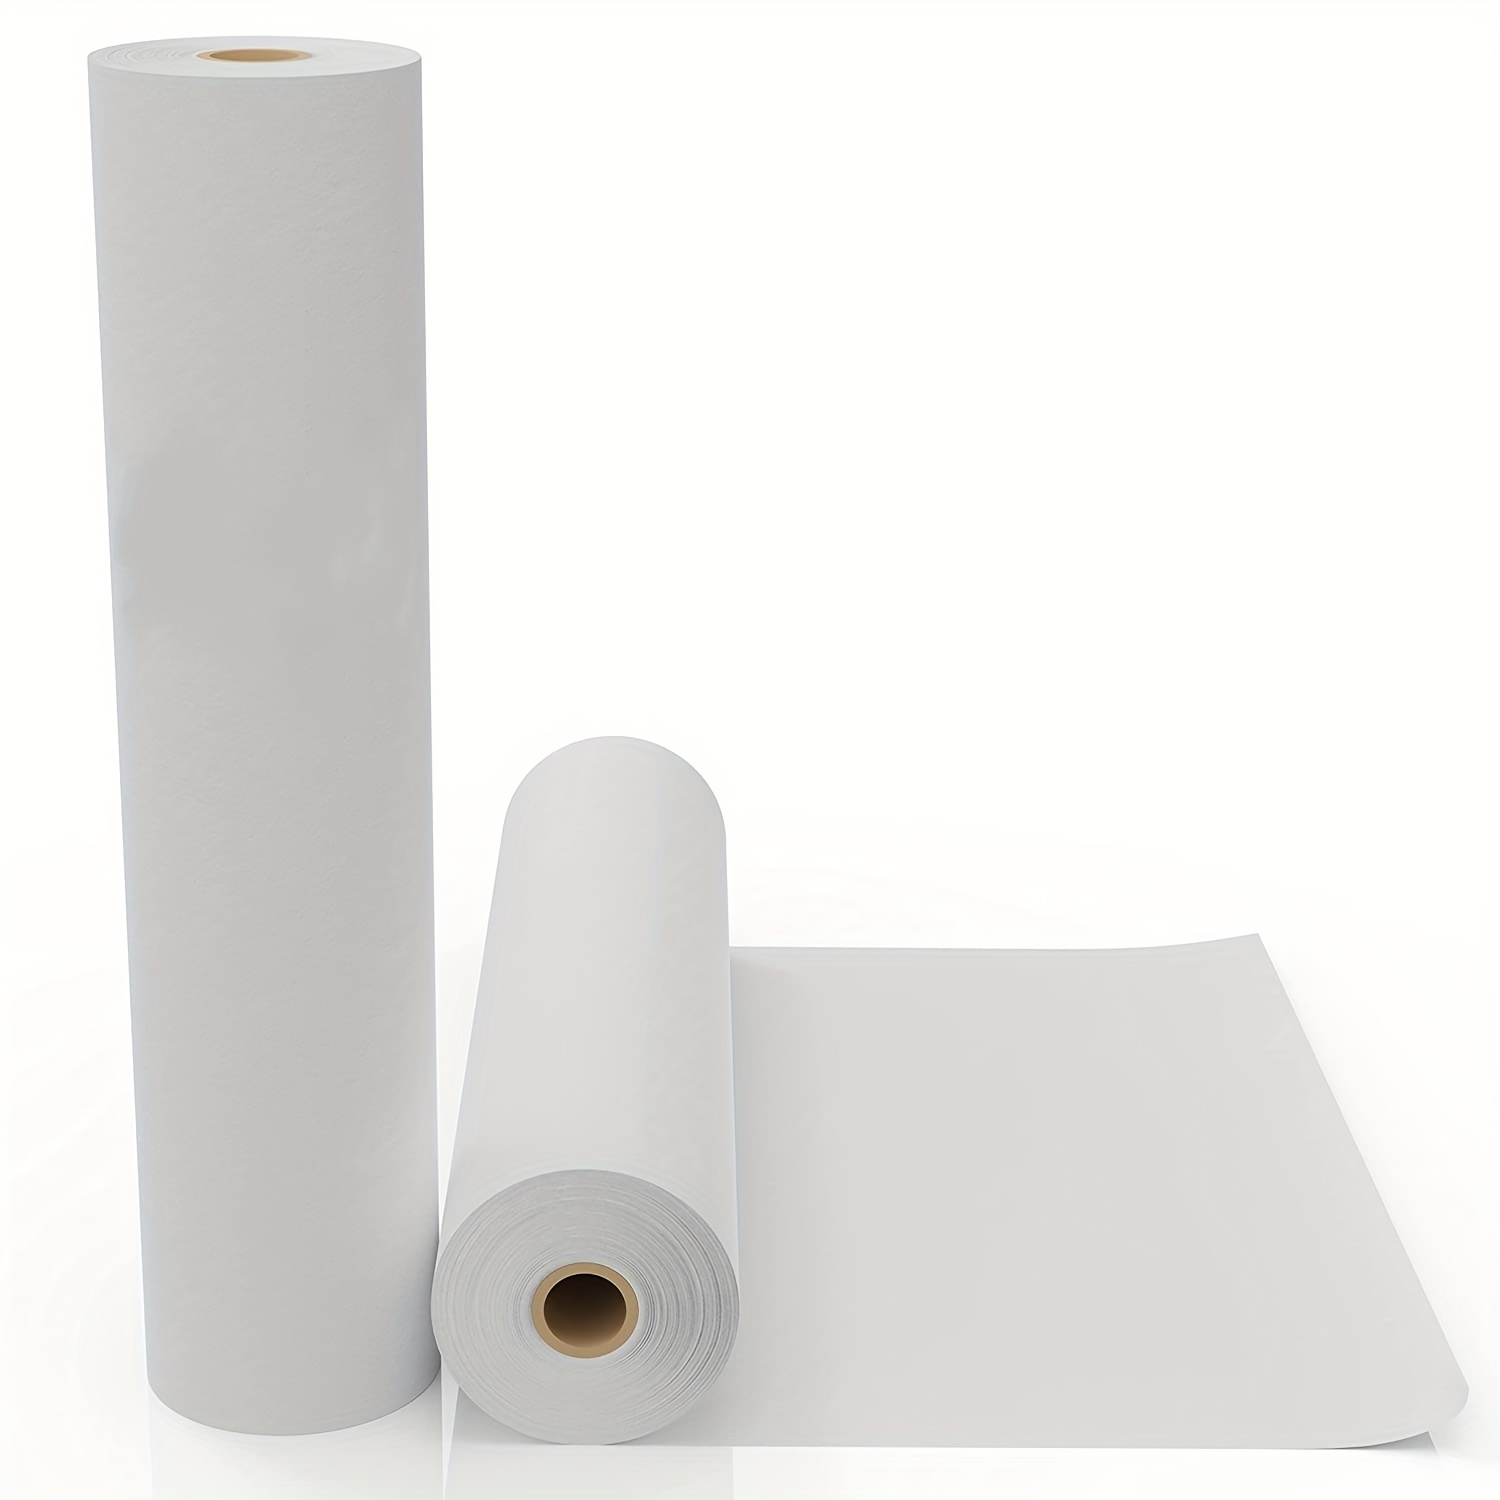 2 Rolls White Arts and Crafts Paper Rolls Fadeless Bulletin Board Paper 